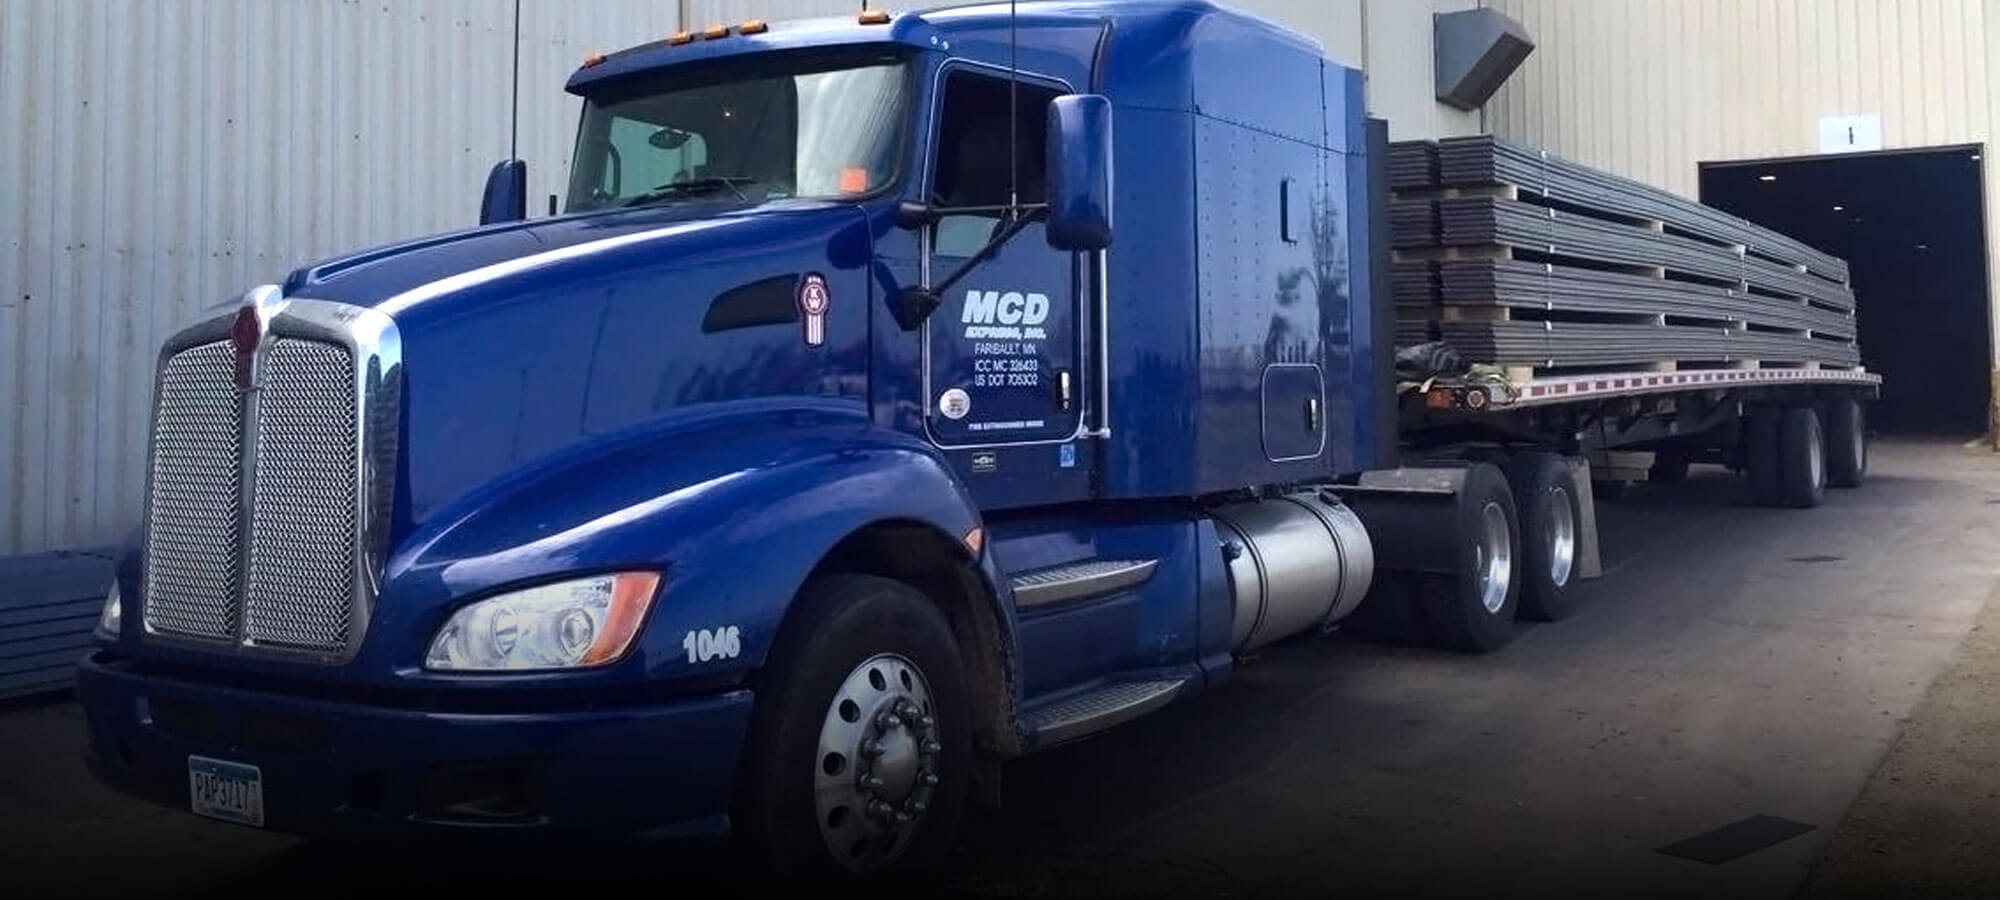 Royal blue MCD Express semi tractor hauling a flatbed trailer loaded with sheet metal